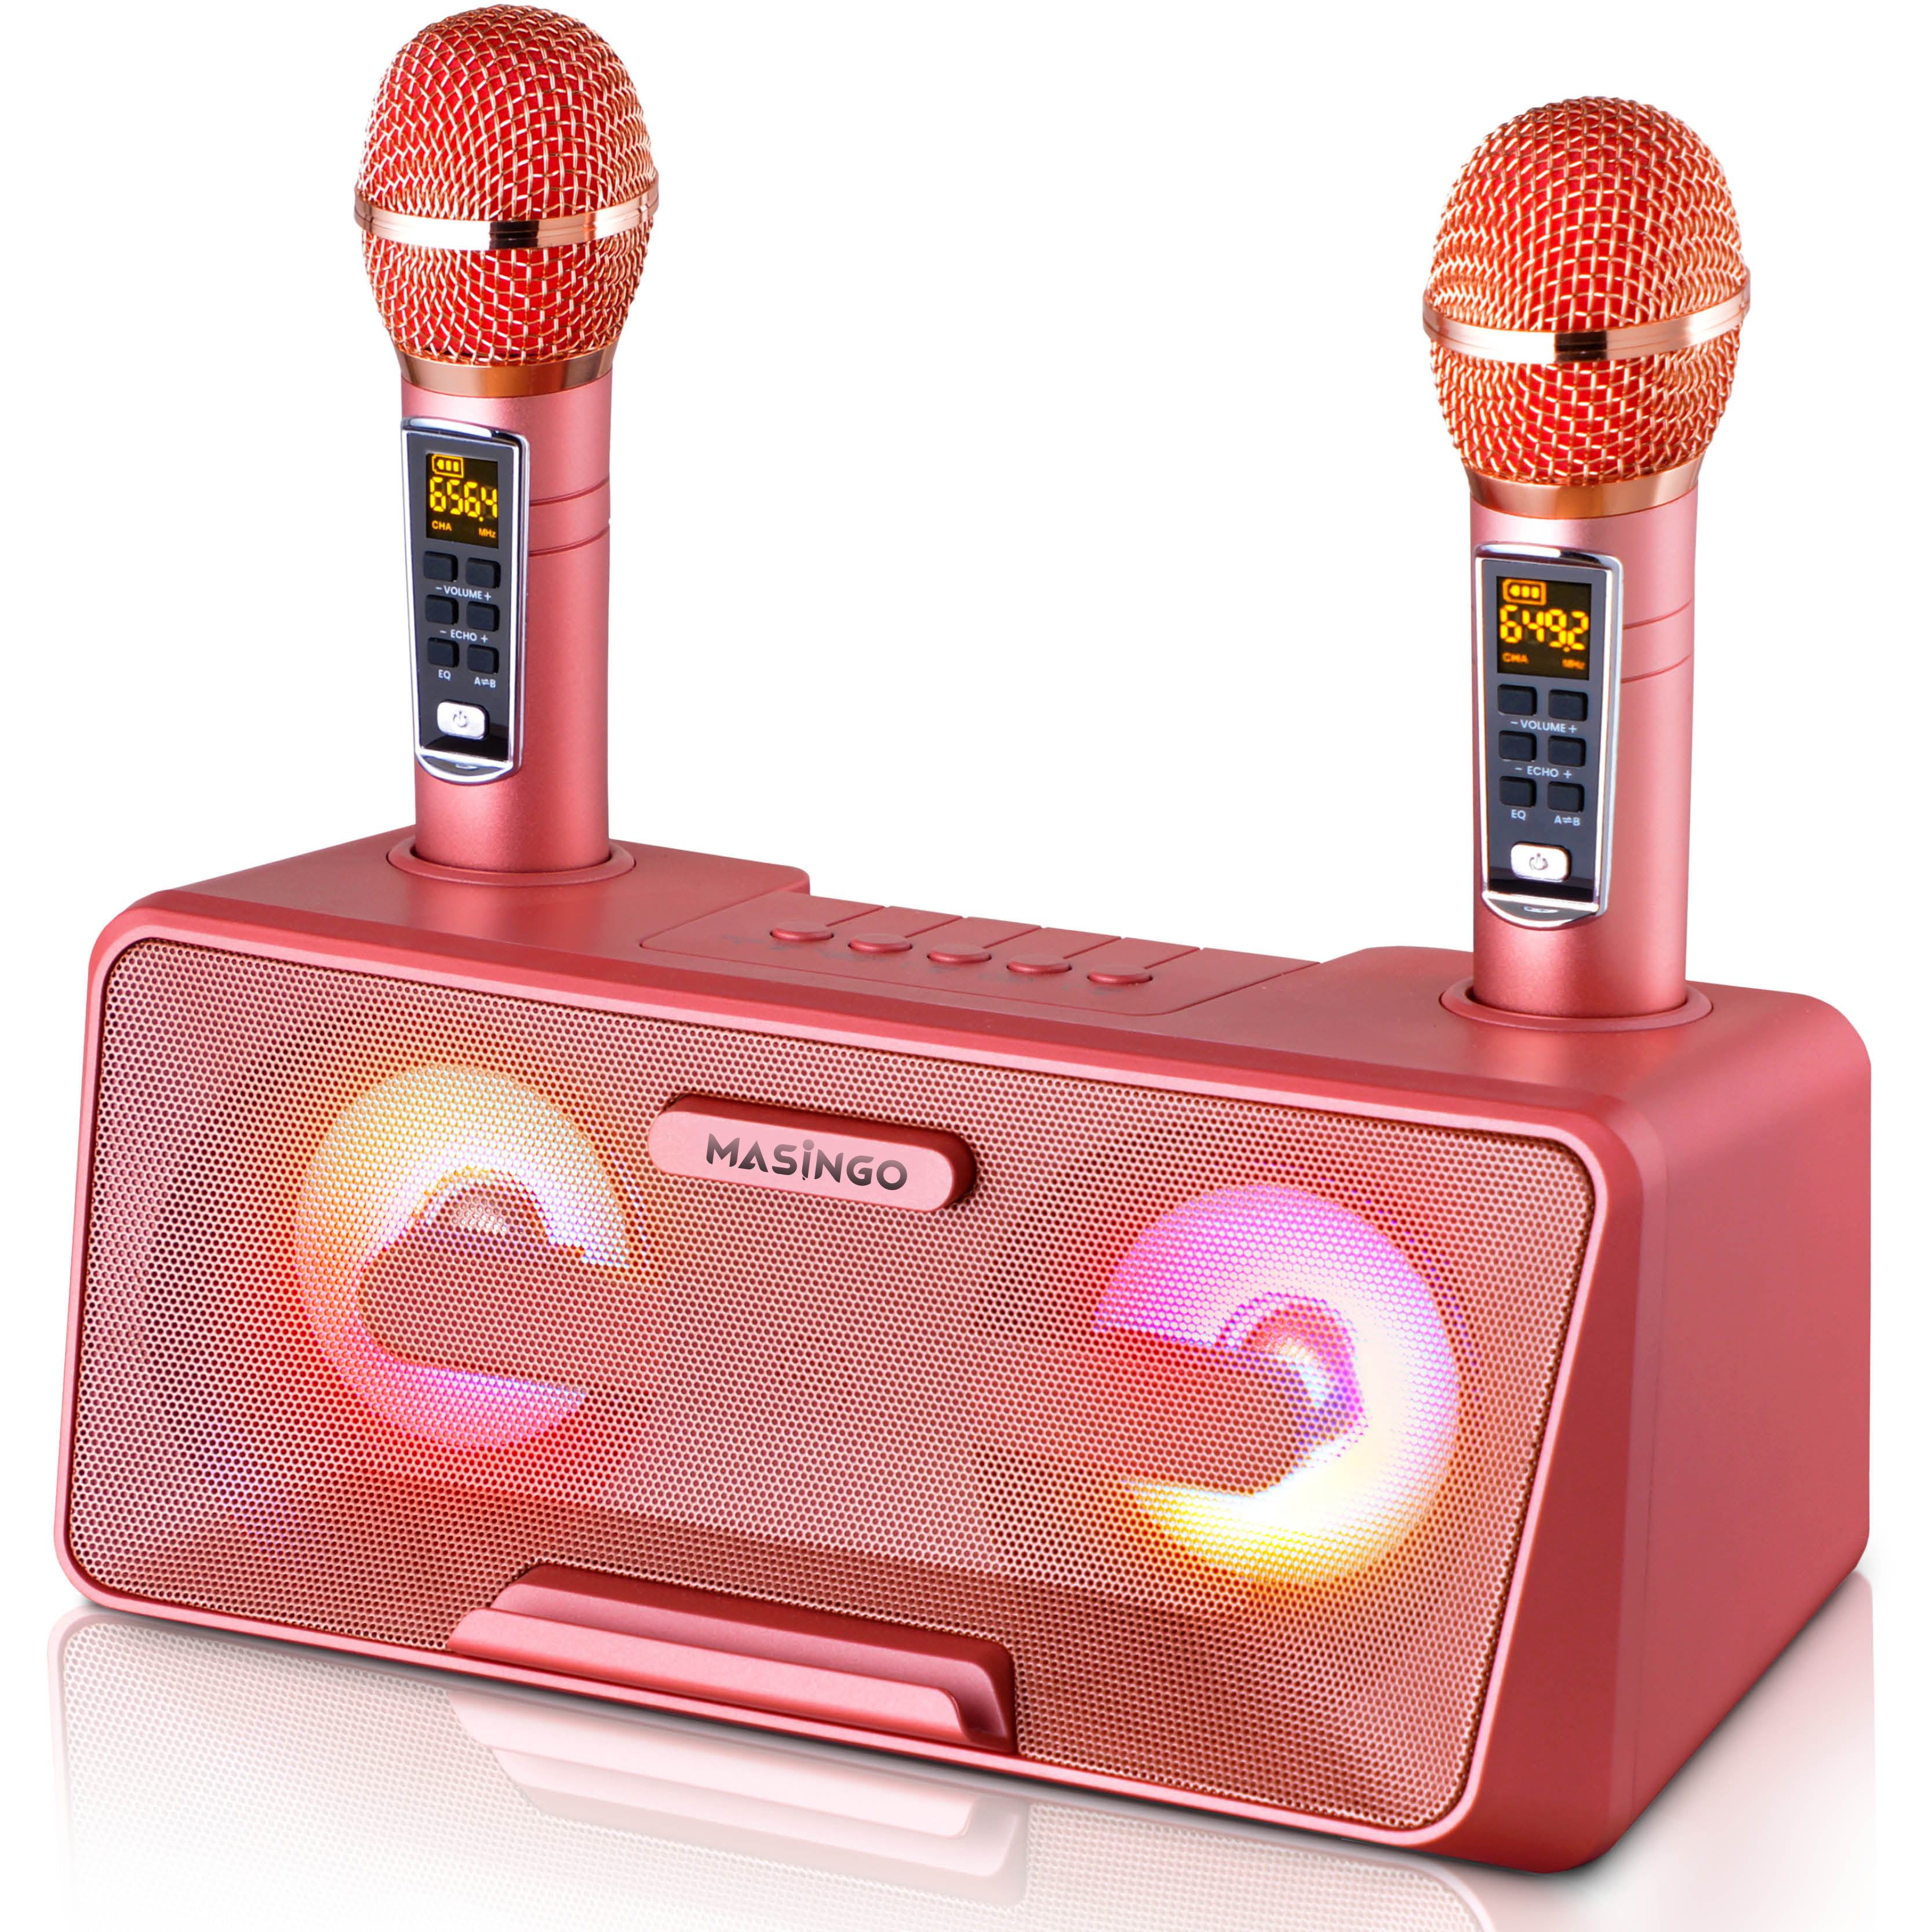 2 Wireless Dual Microphones Bluetooth Portable Singing PA Speaker System LED & Disco Lights TV and Aux Cable Karaoke Machine for Adults and Kids Best Gift for Boys & Girls 2 Pack